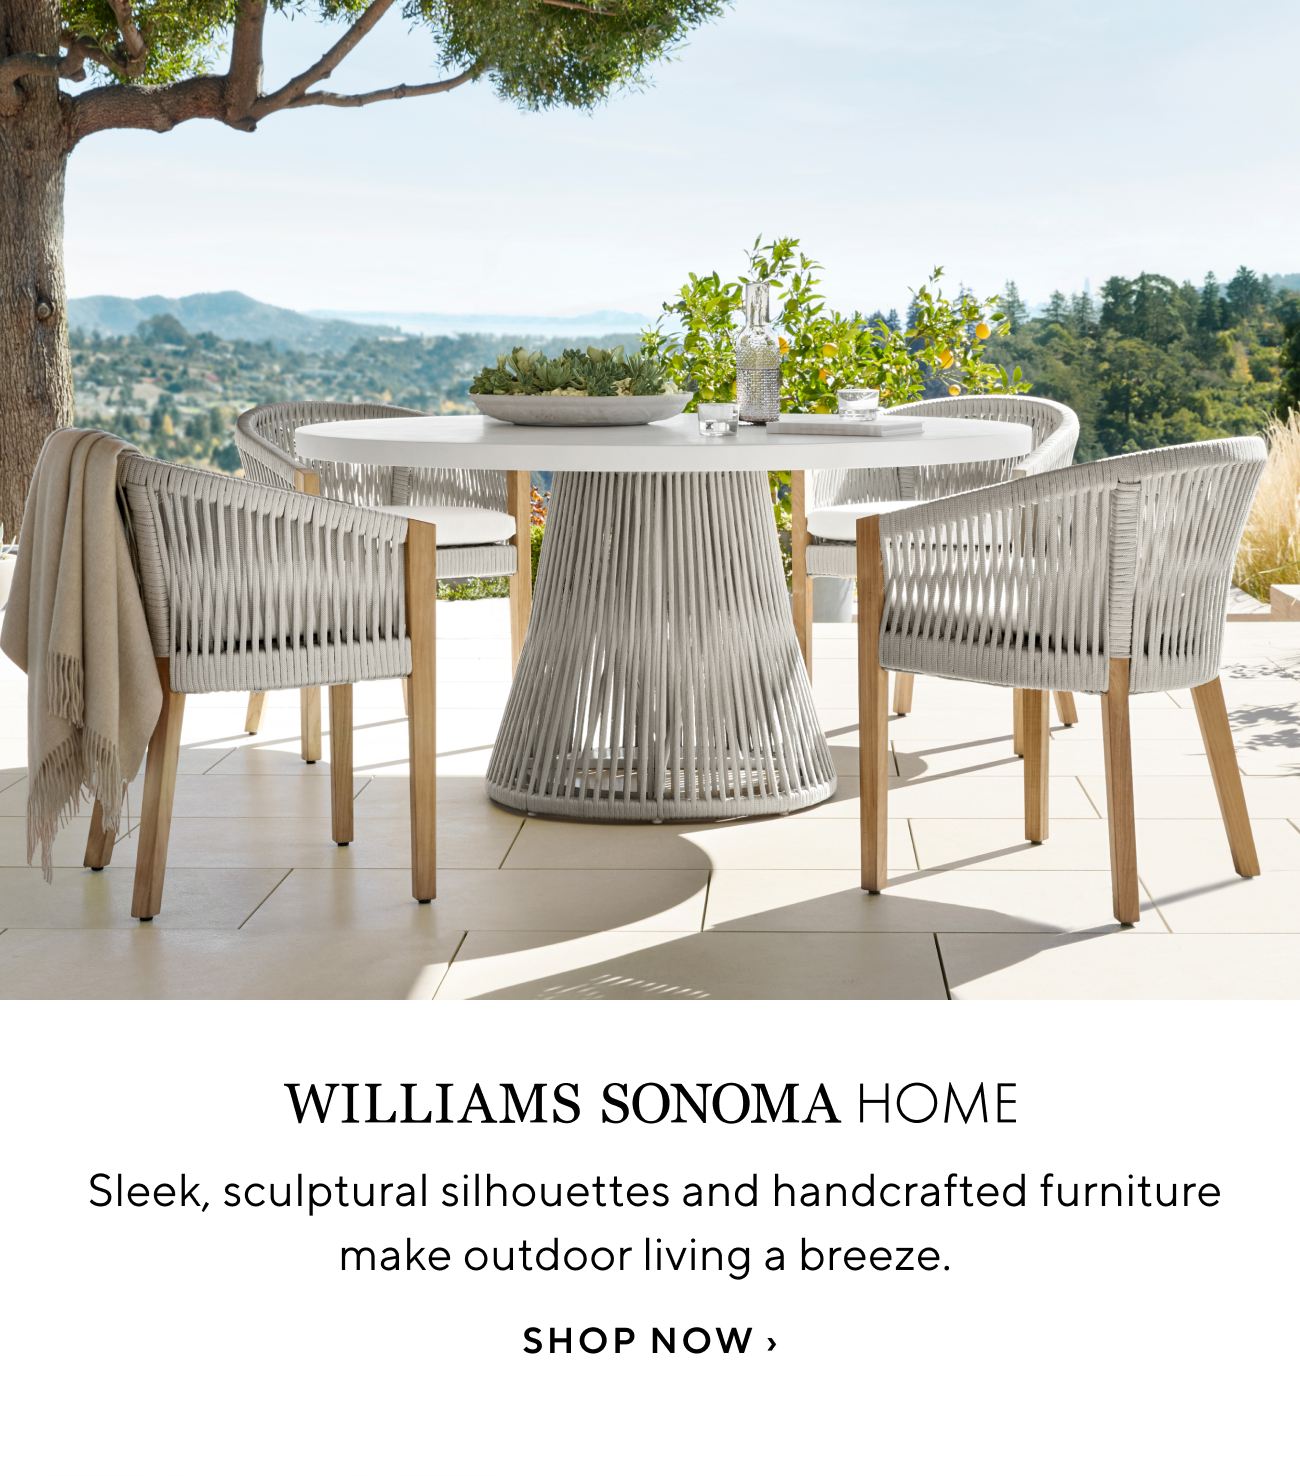  WILLIAMS SONOMA HOME Sleek, sculptural silhouettes and handcrafted furniture make outdoor living a breeze. SHOP NOW 